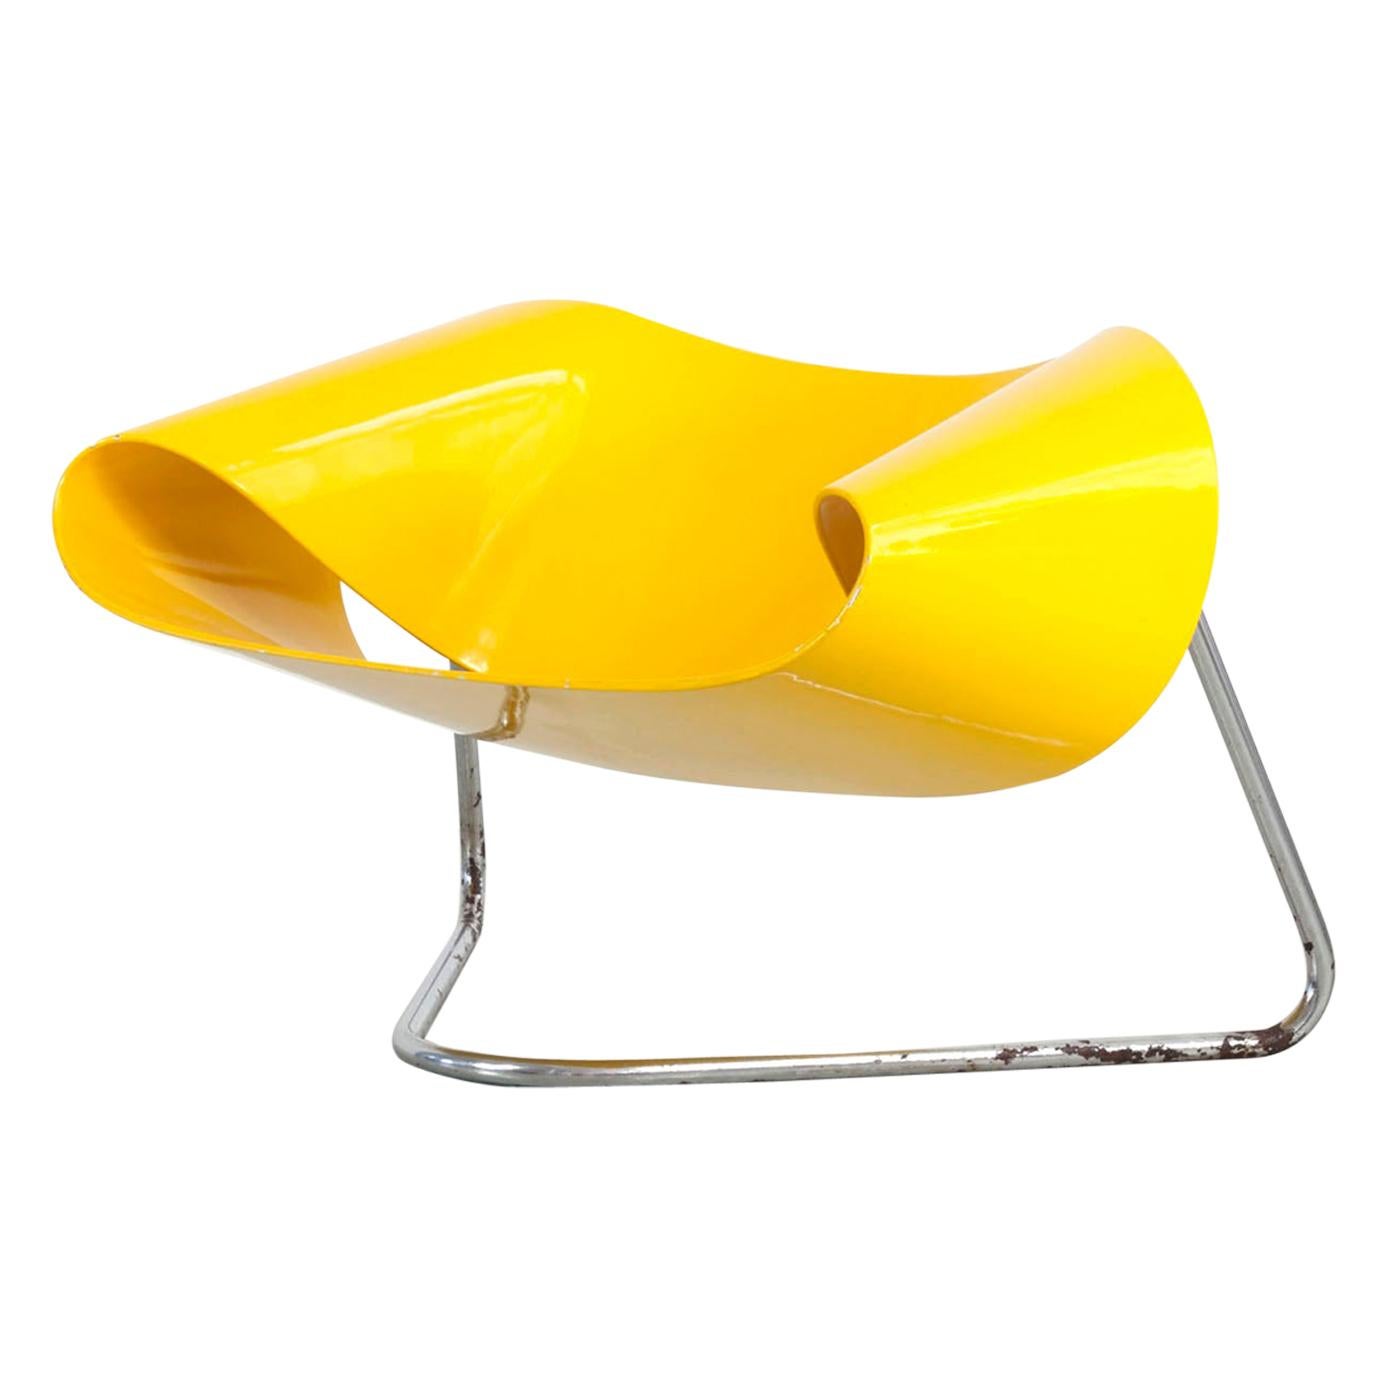 Original Yellow "Ribbon Chair" Model CL9, by Franca Stagi and Cesare Leonardi For Sale